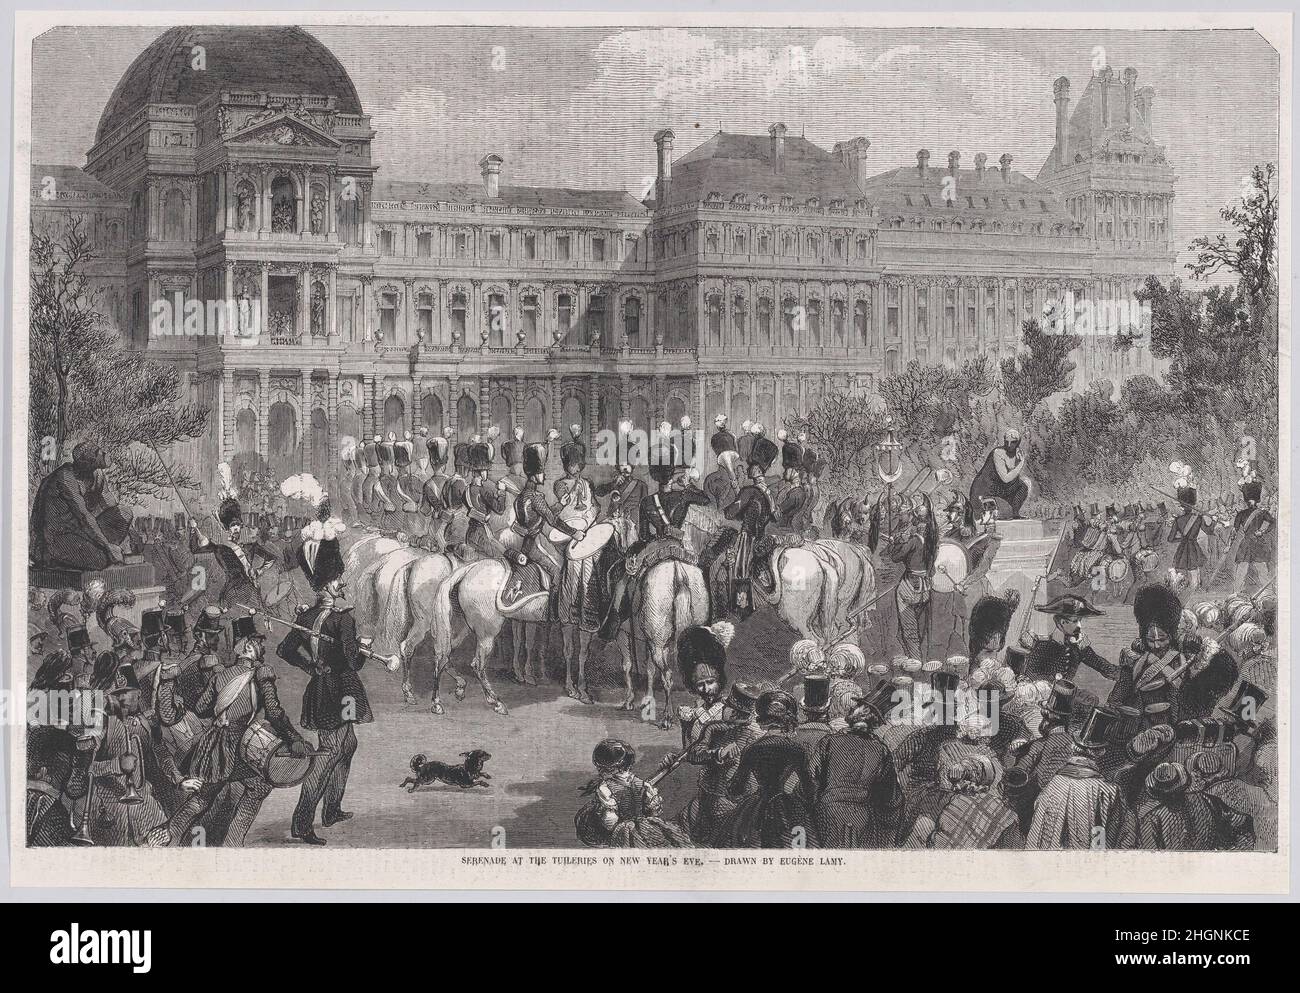 Serenade at the Tuileries on New Year's Eve, from 'Illustrated London News' December 24, 1853 After Eugène-Louis Lami Members of the National Guard troop through the Tuileries Gardens early on New Year's morning and pause infront of the palace to perform out of respect to Emperor Napoleon III. Related text suggests that the loud noise of brass and drums were not welcomed by Parisians, coming so close on the heels of New Year's Eve celebrations. Lami, who designed the image had studied with Horace Vernet and Antoine-Jean Gros and was known for his military subjects. The 'Illustrated London News Stock Photo